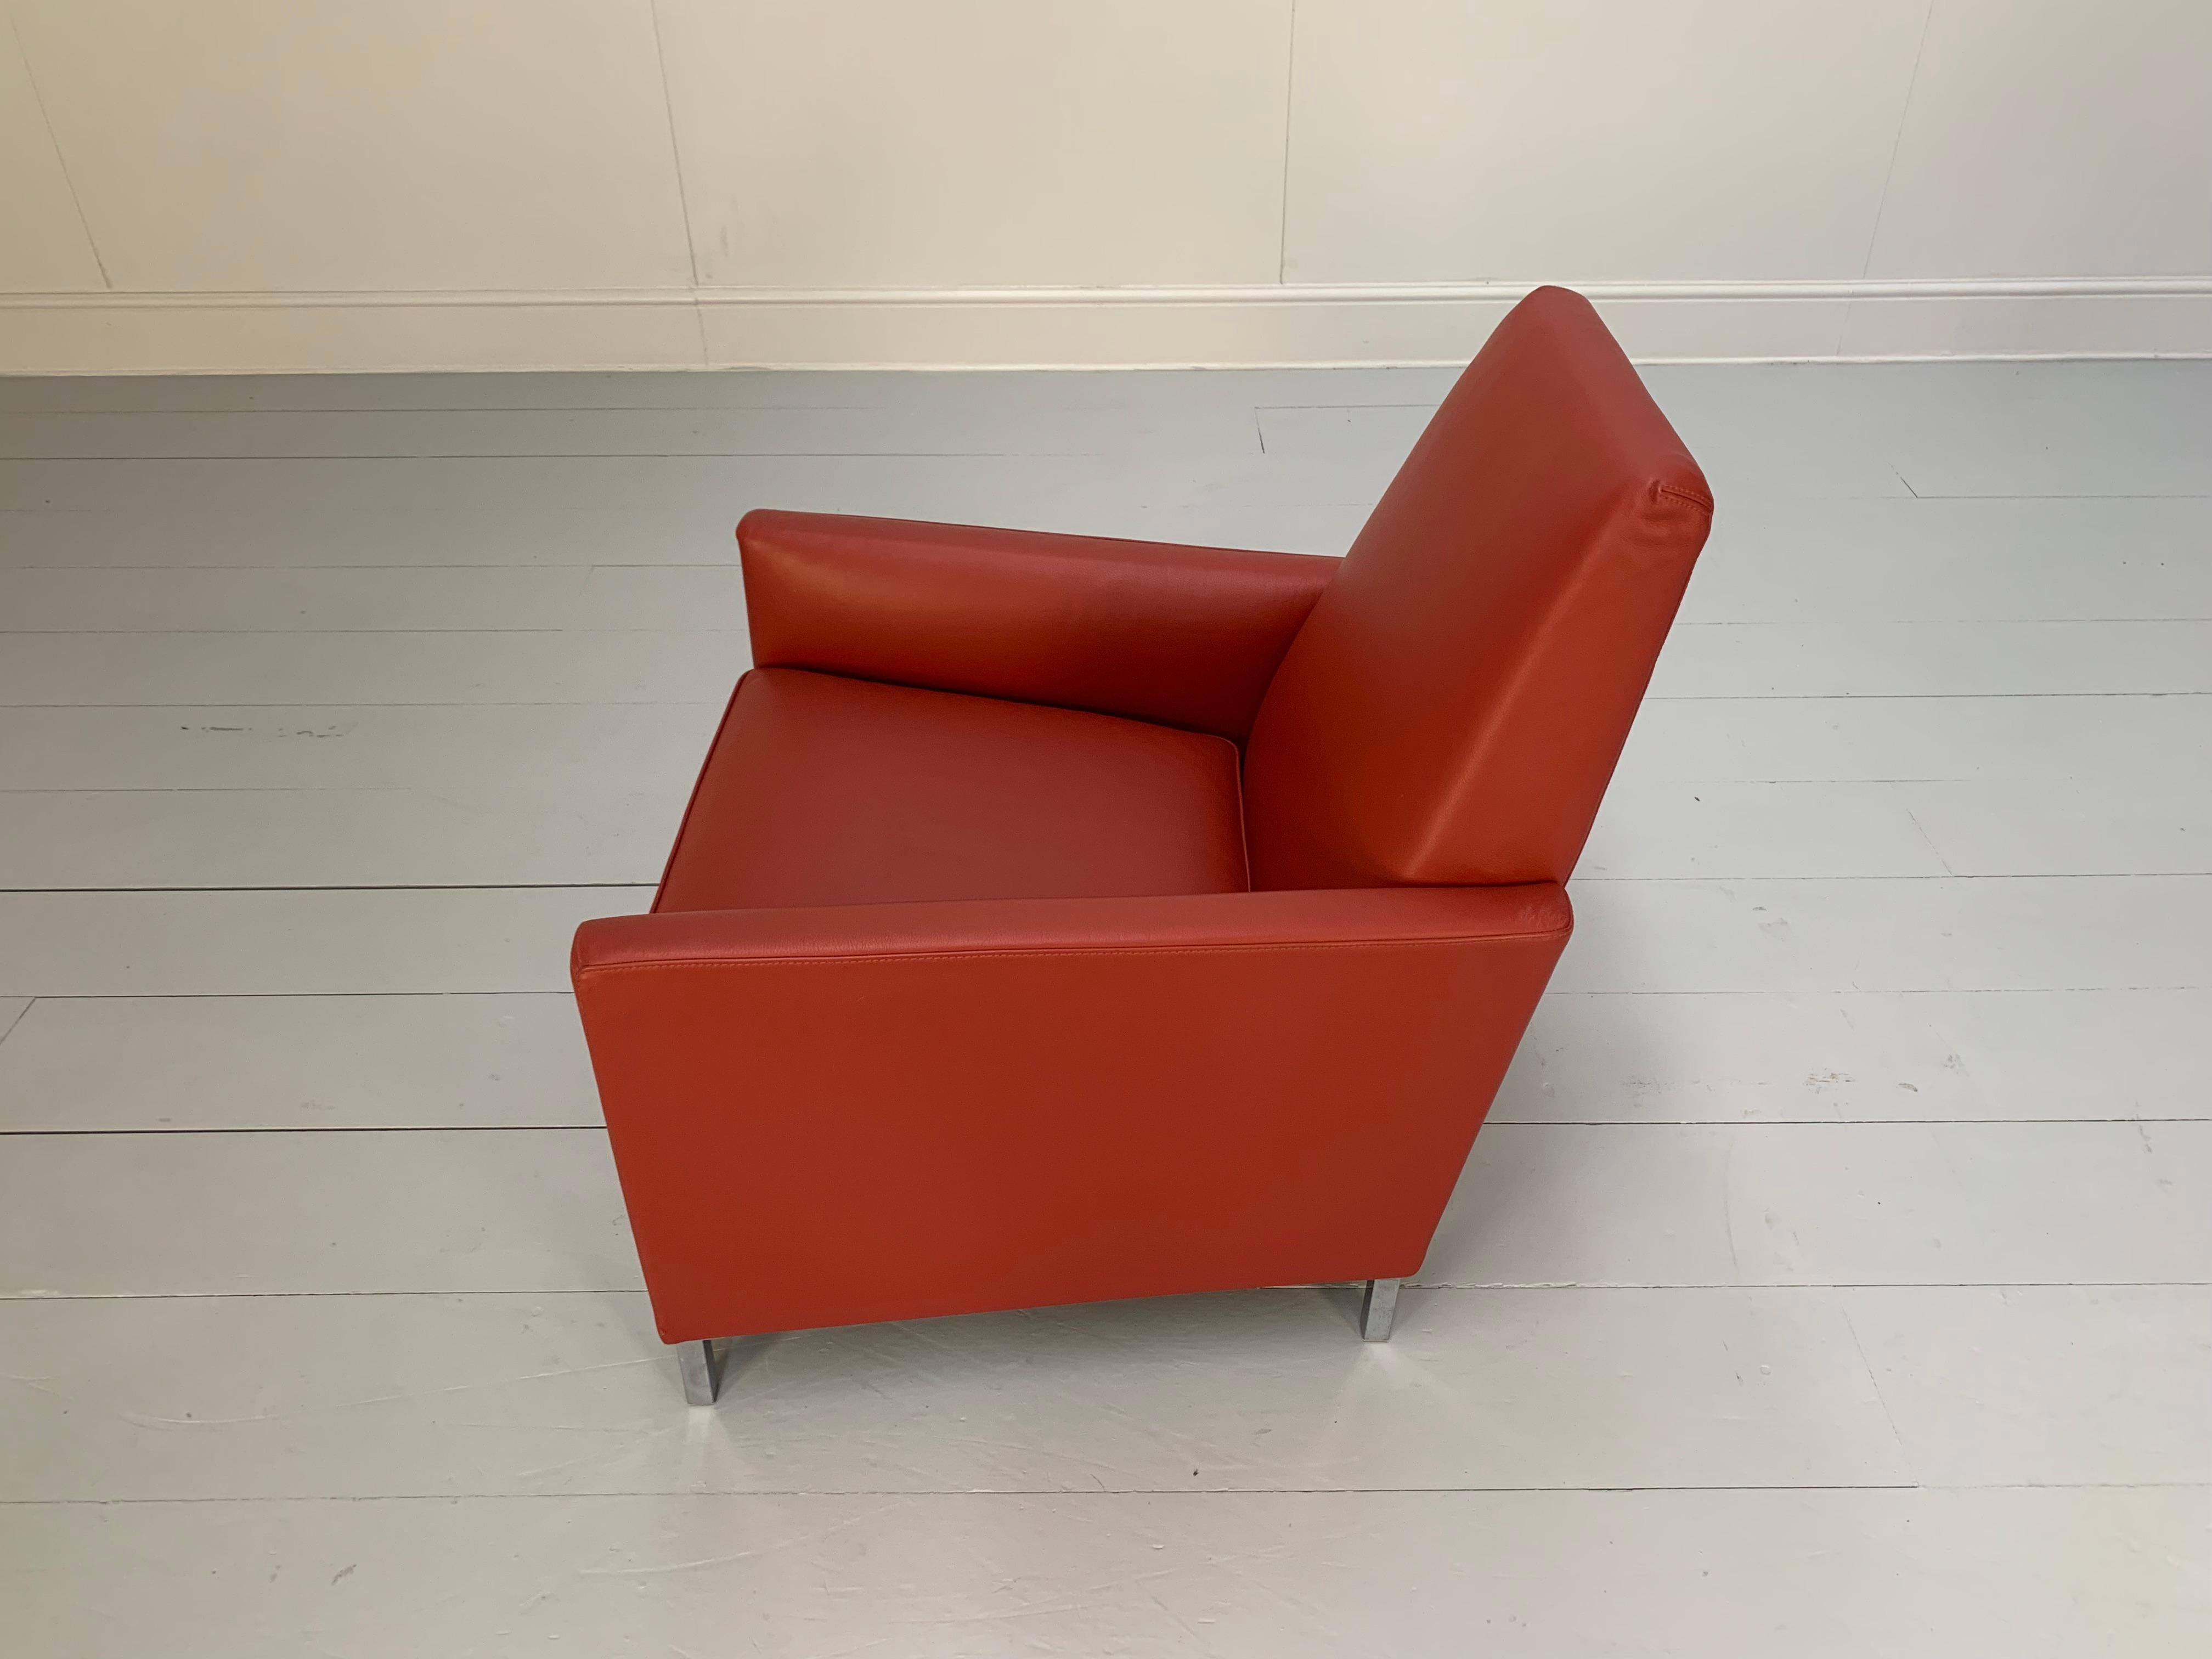 Moroso “Hyde Park” Sofa & 2 Armchair Suite, in Red “Pelle” Leather For Sale 12